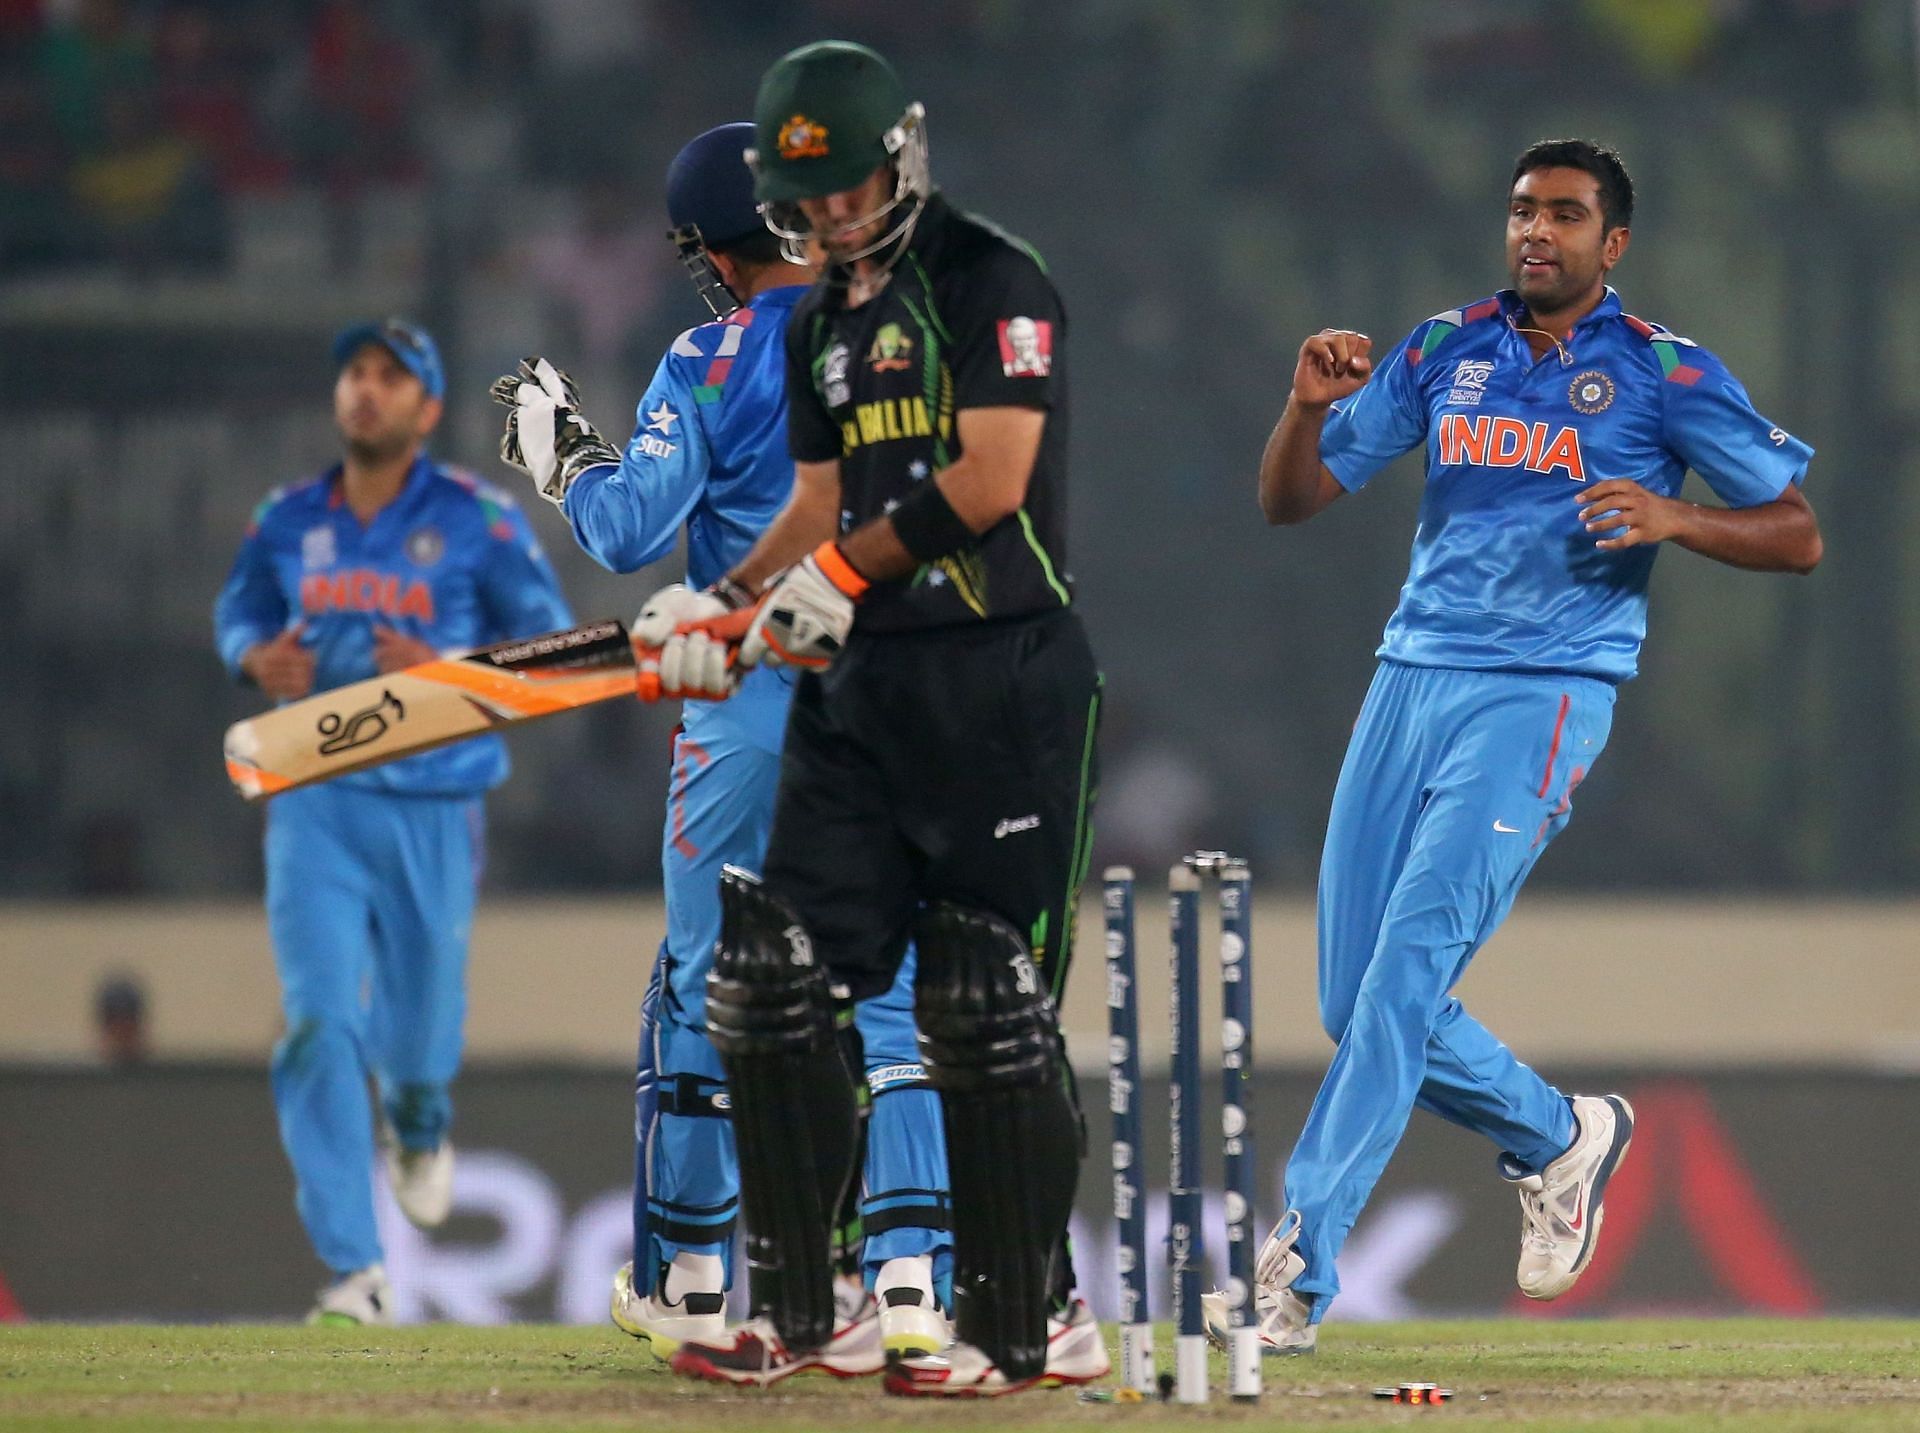 Ravichandran Ashwin reacts after dismissing Glenn Maxwell in the 2014 T20 World Cup group clash. Image: Getty Images